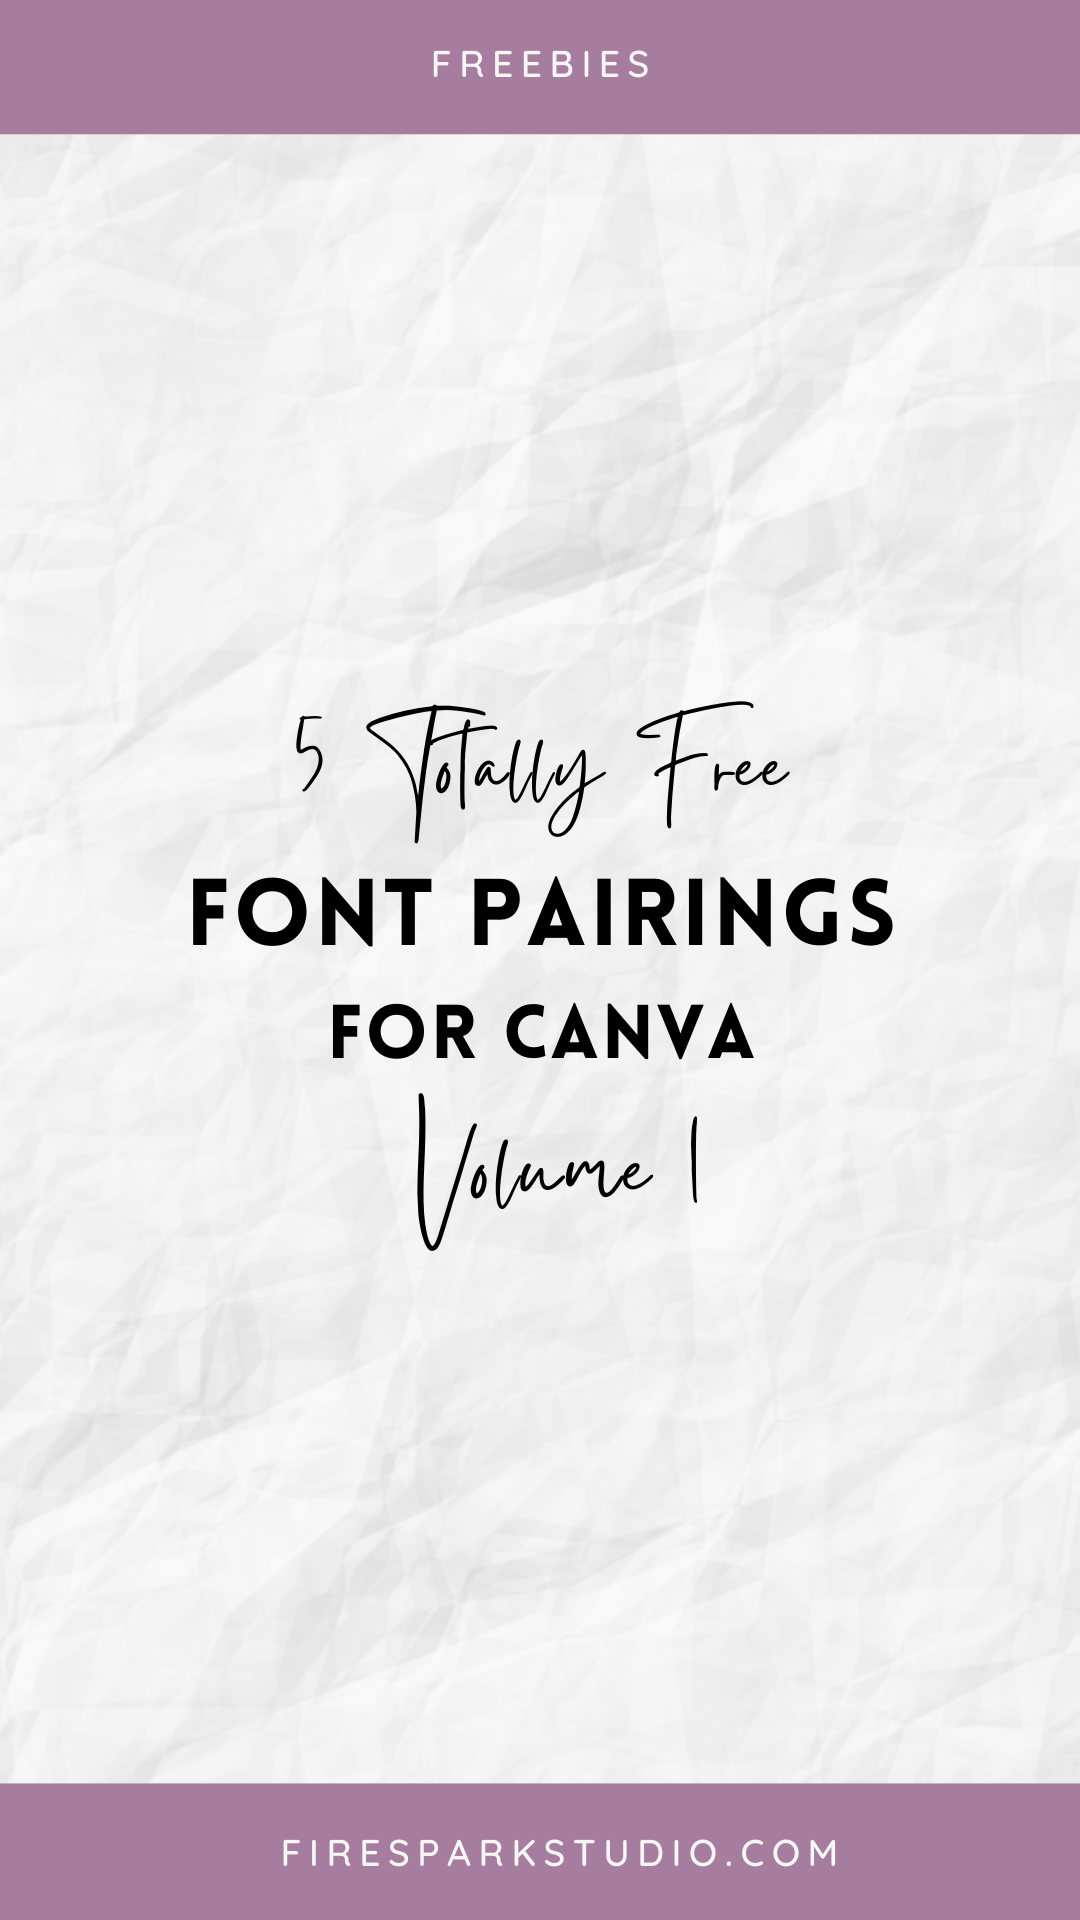 Five Totally Free Font Pairings for Canva Volume 1